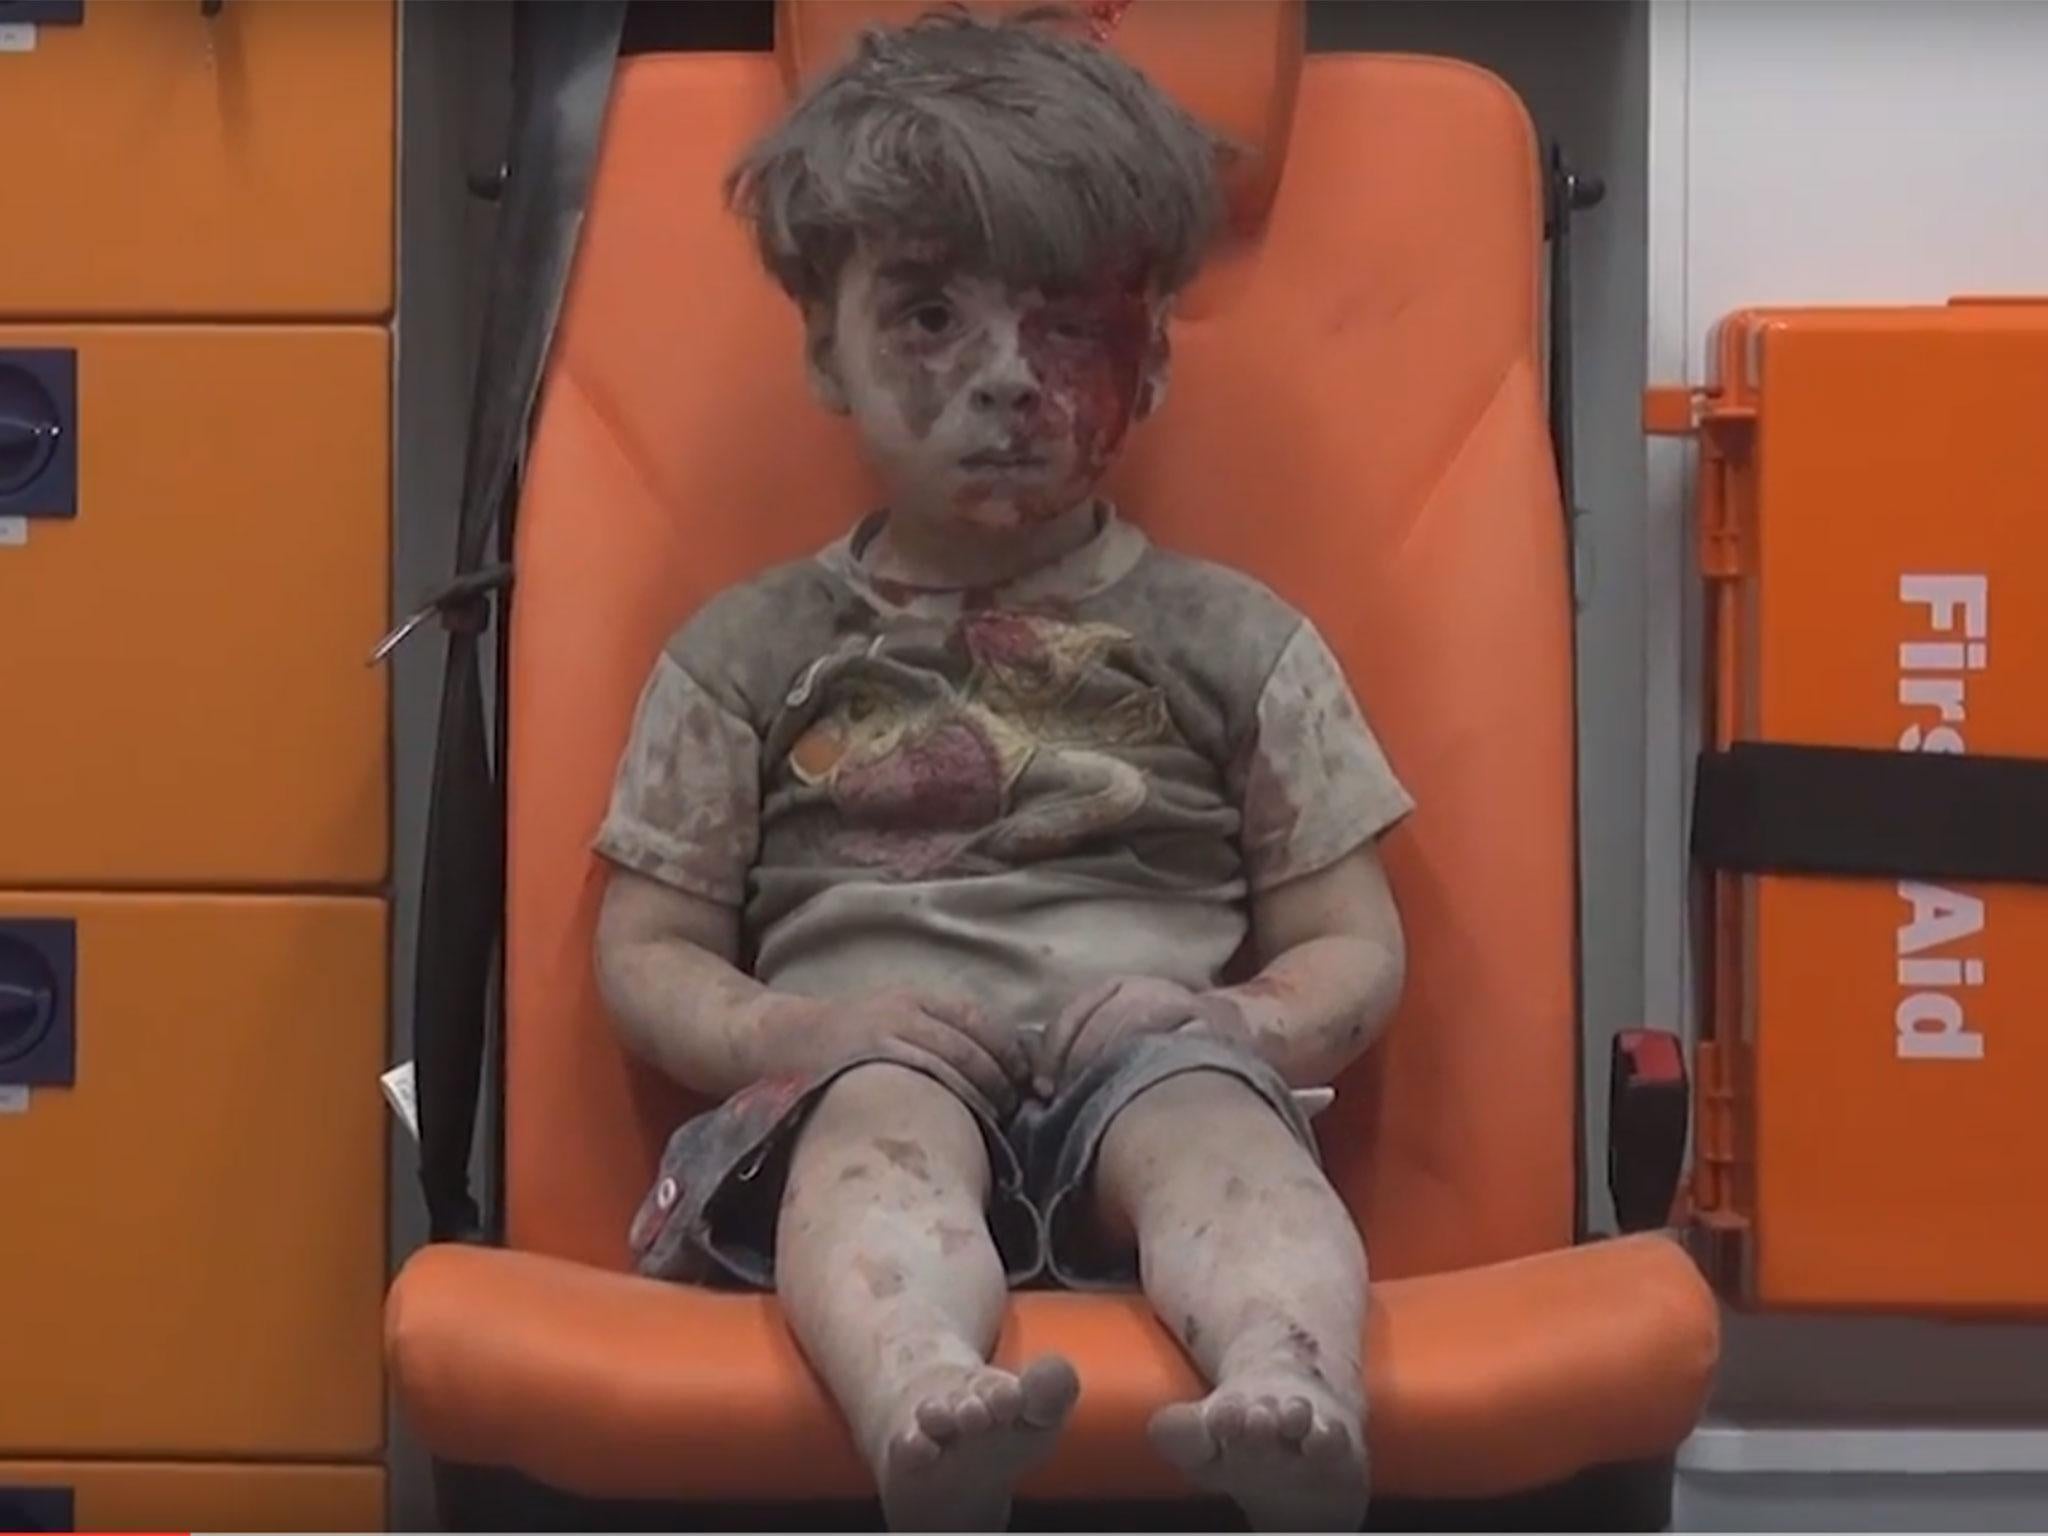 Aleppo boy: Photographer behind iconic image of dazed and bloodied child describes harrowing moments that led up to it